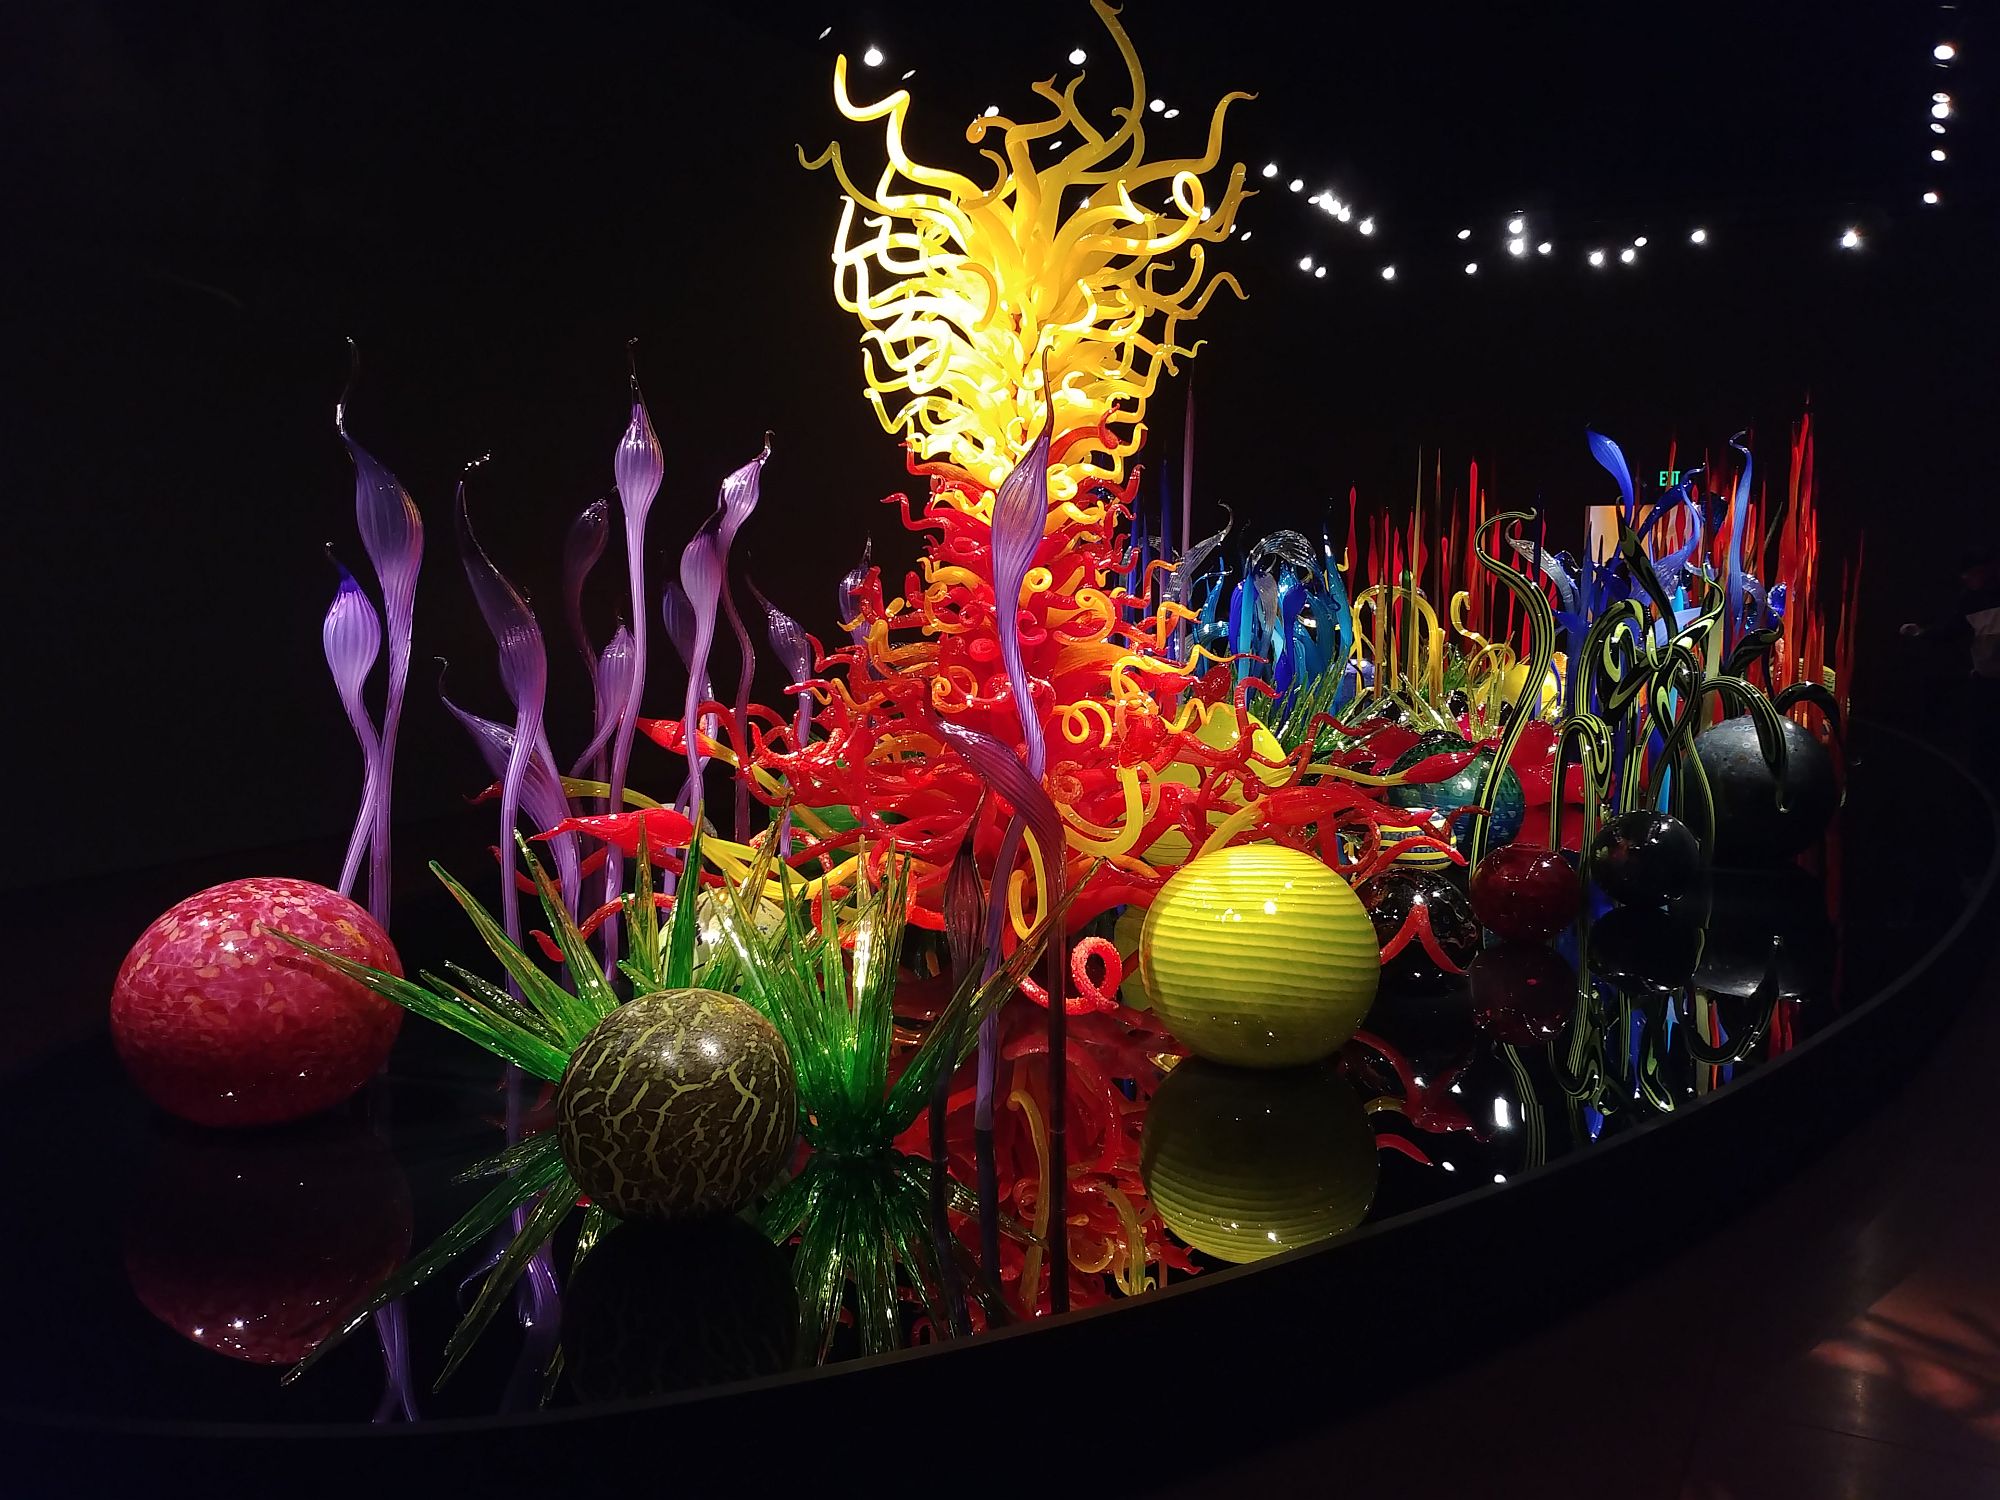 Chihuly Glass and Garden - 35 - Mille Fiori